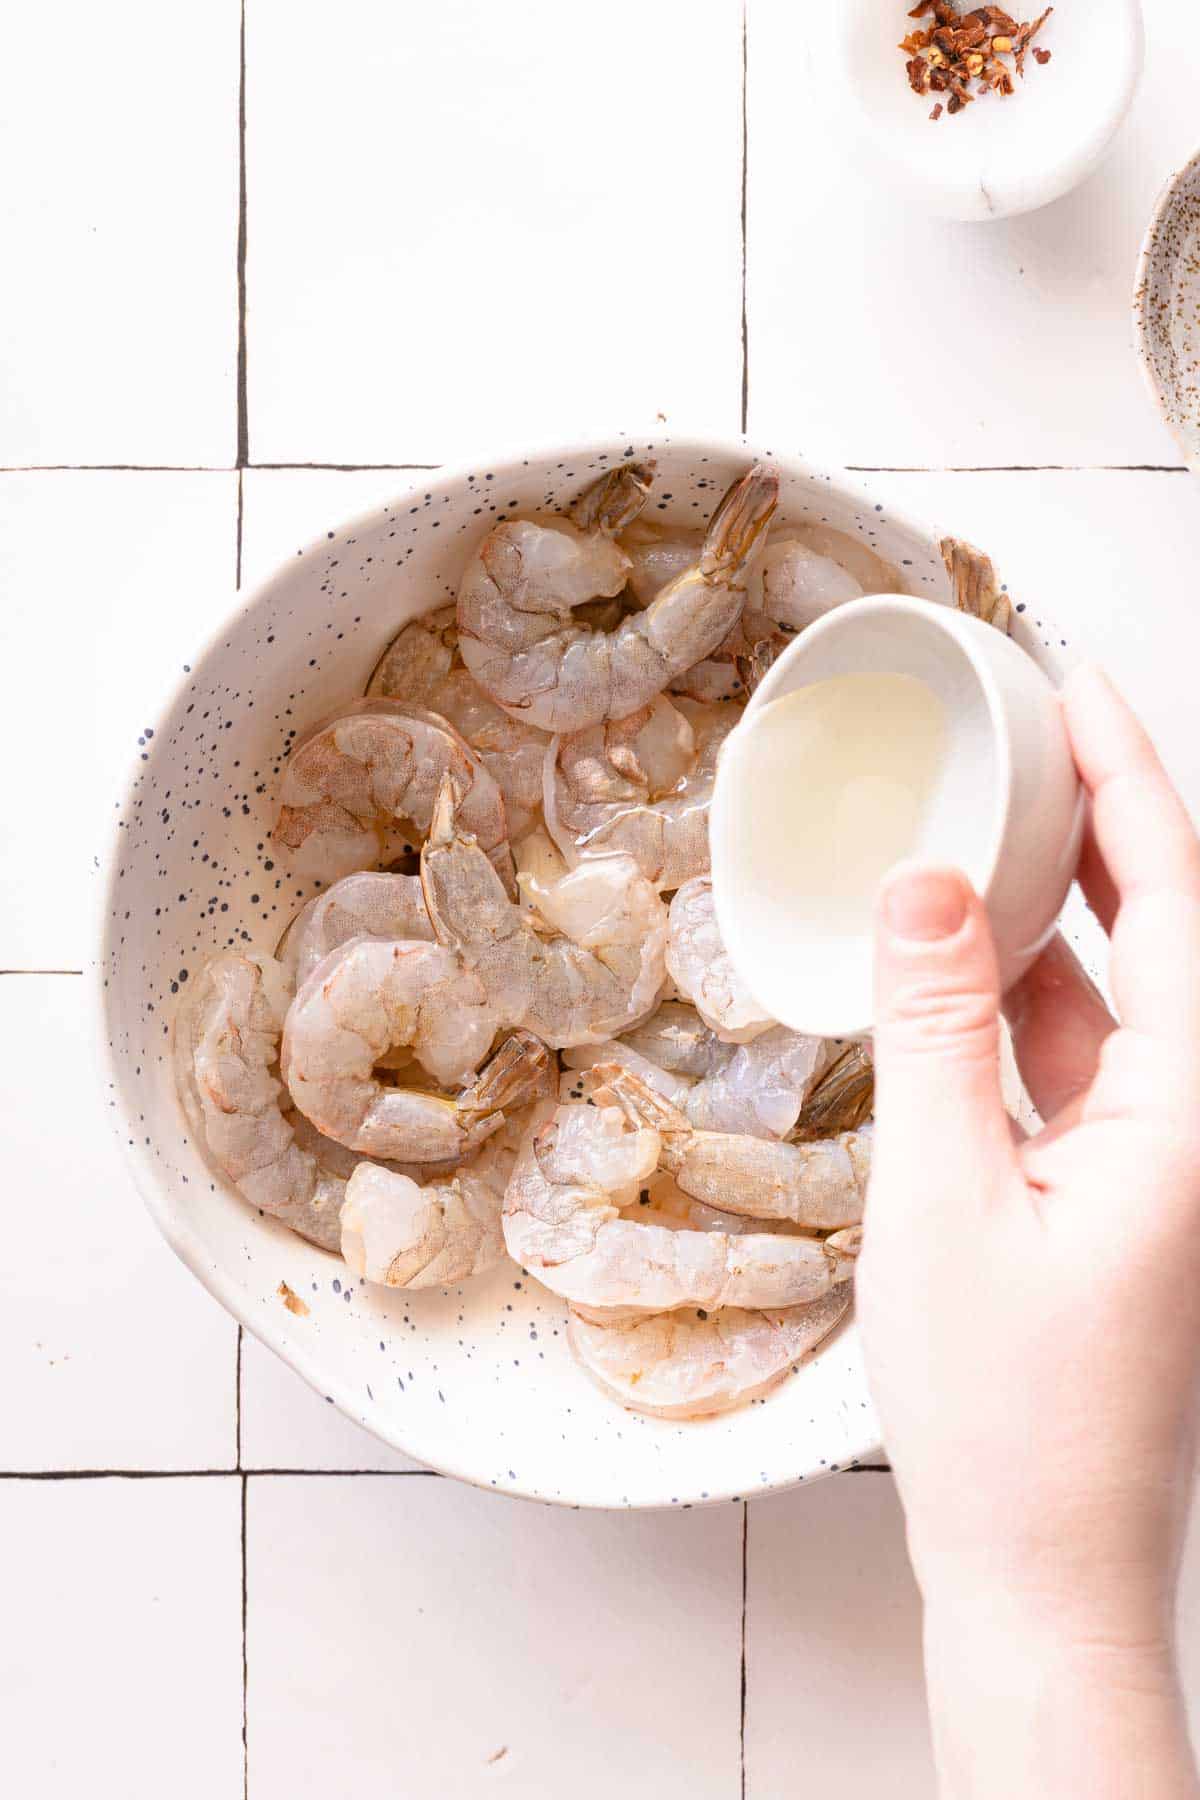 oil being drizzled over raw shrimp in a bowl.